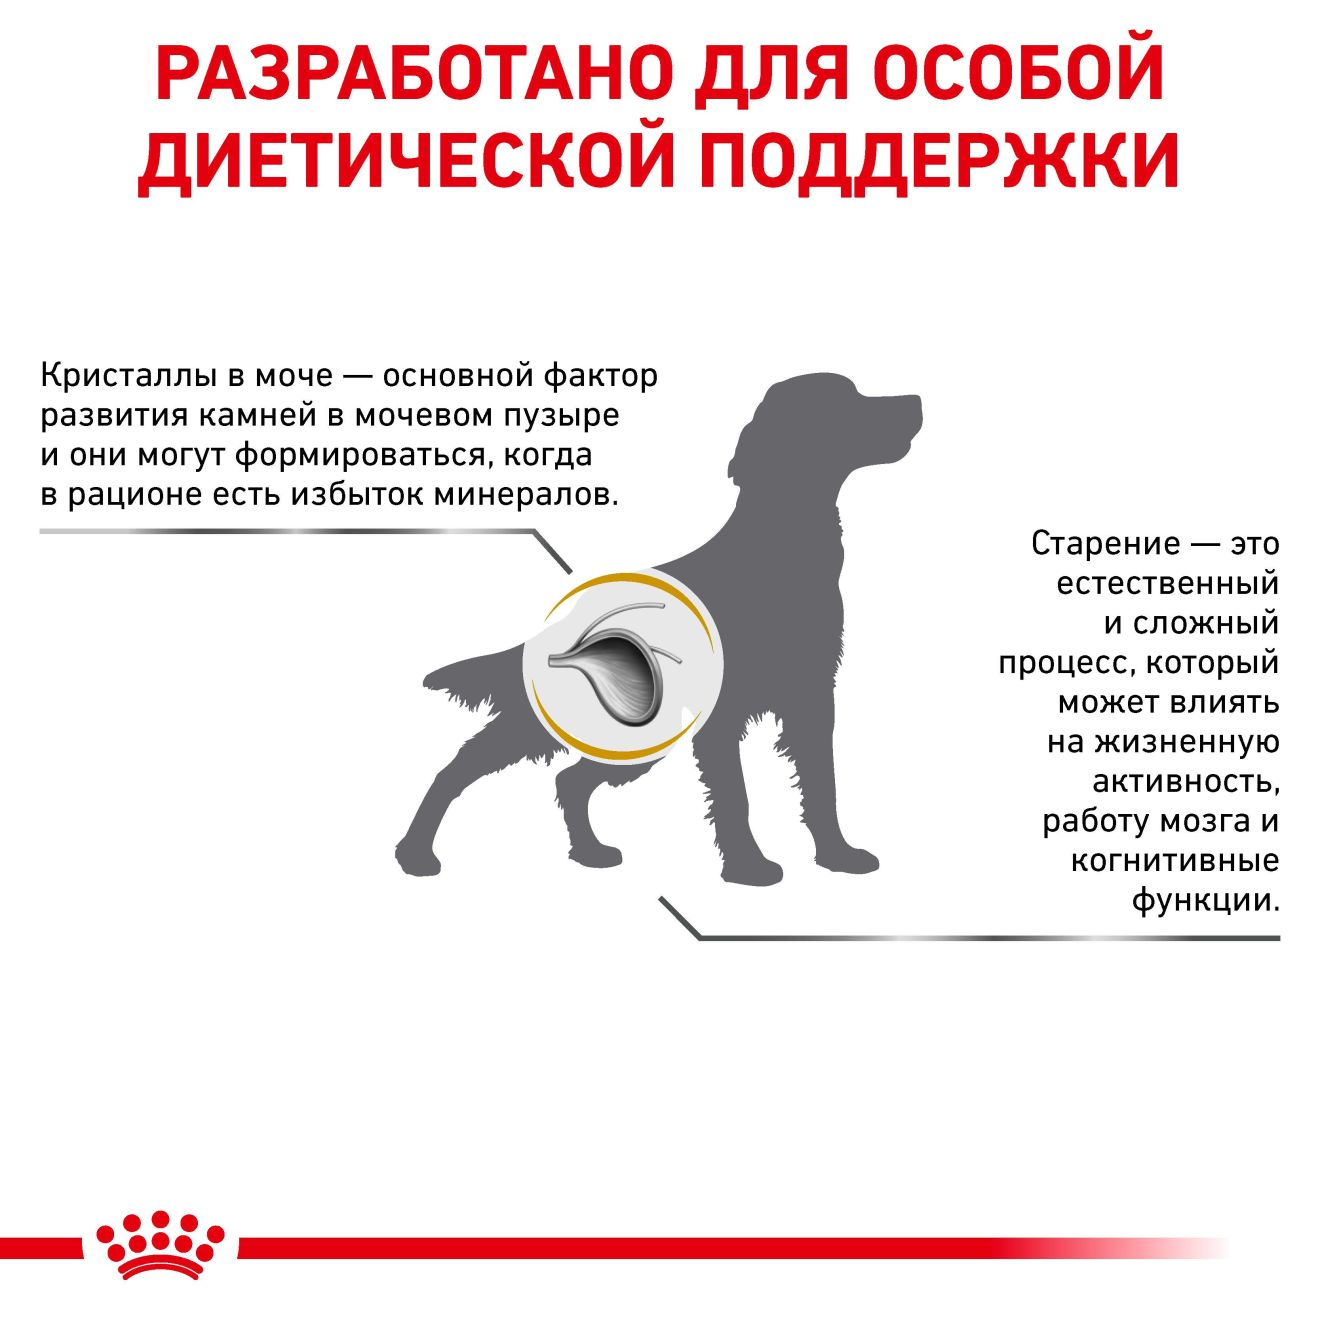 Royal Canin Urinary S/O Ageing 7+